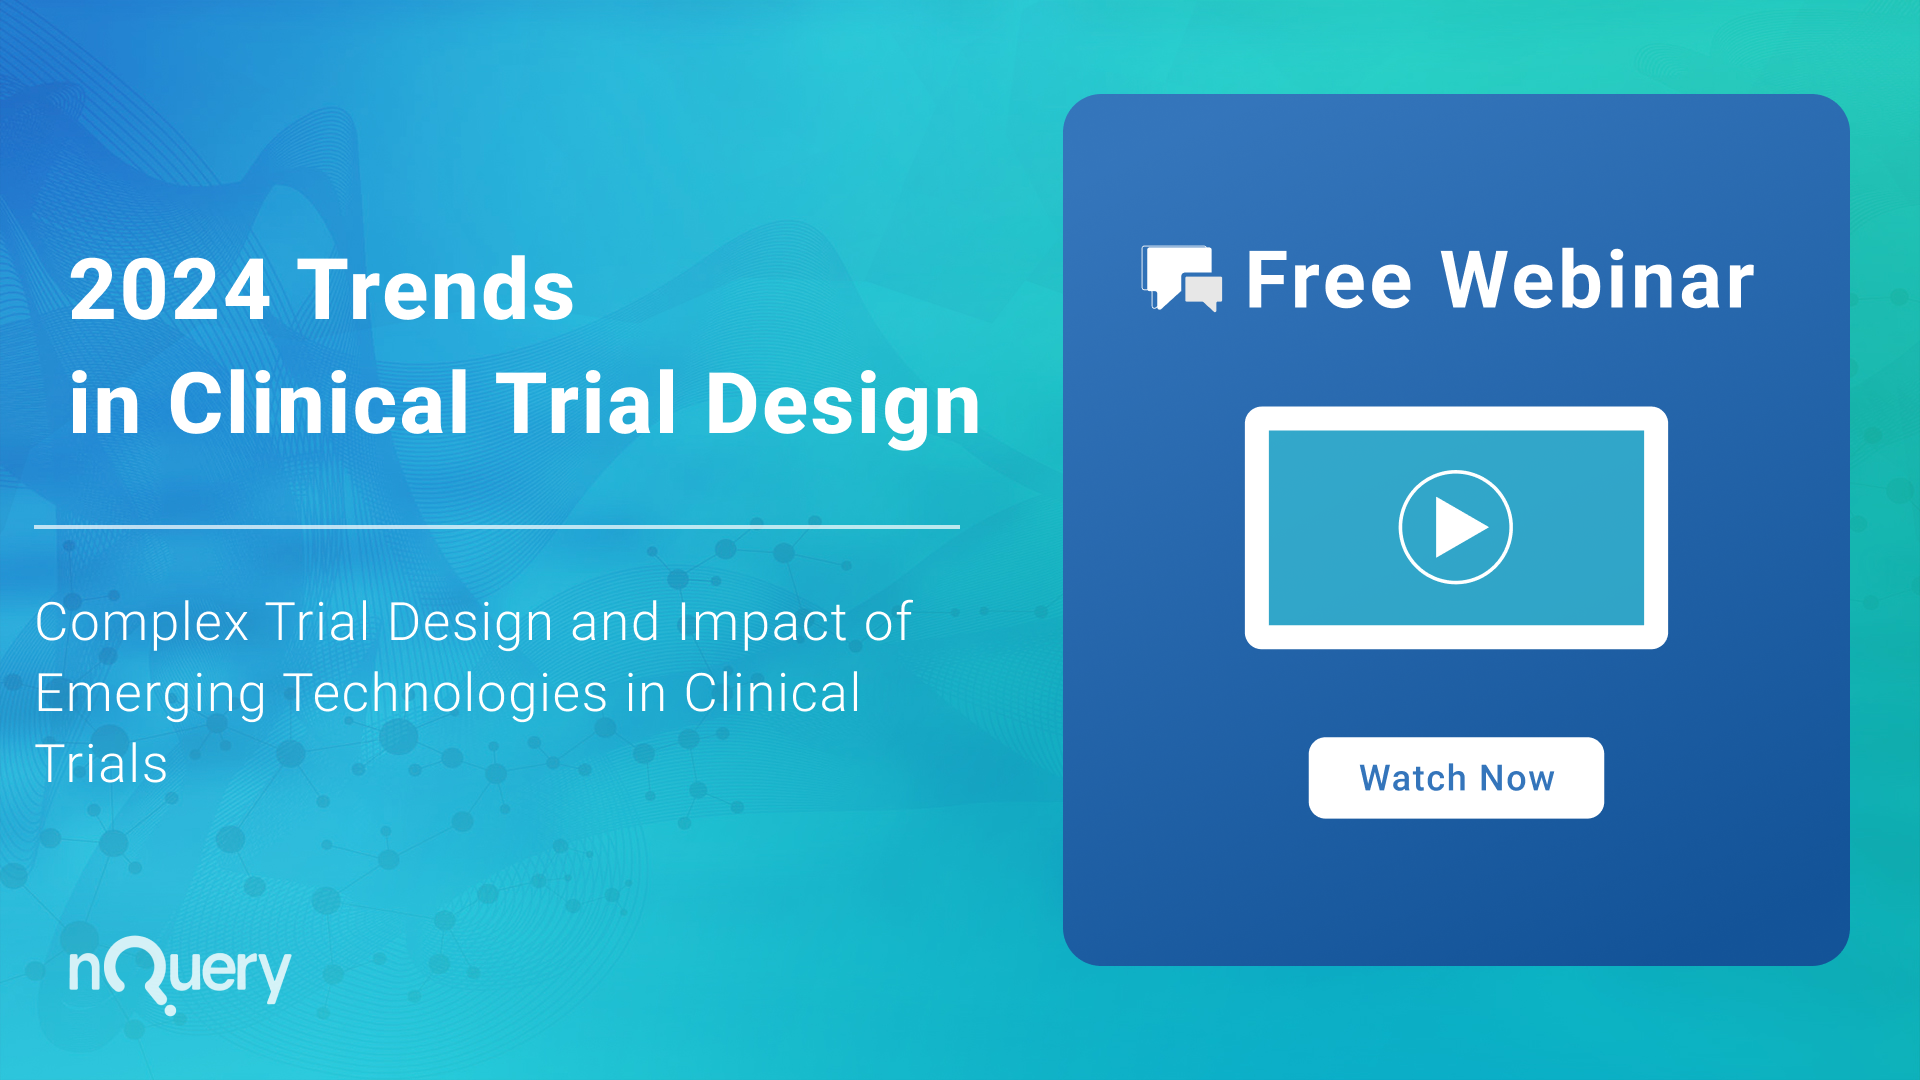 2024 Trends in Clinical Trial Design